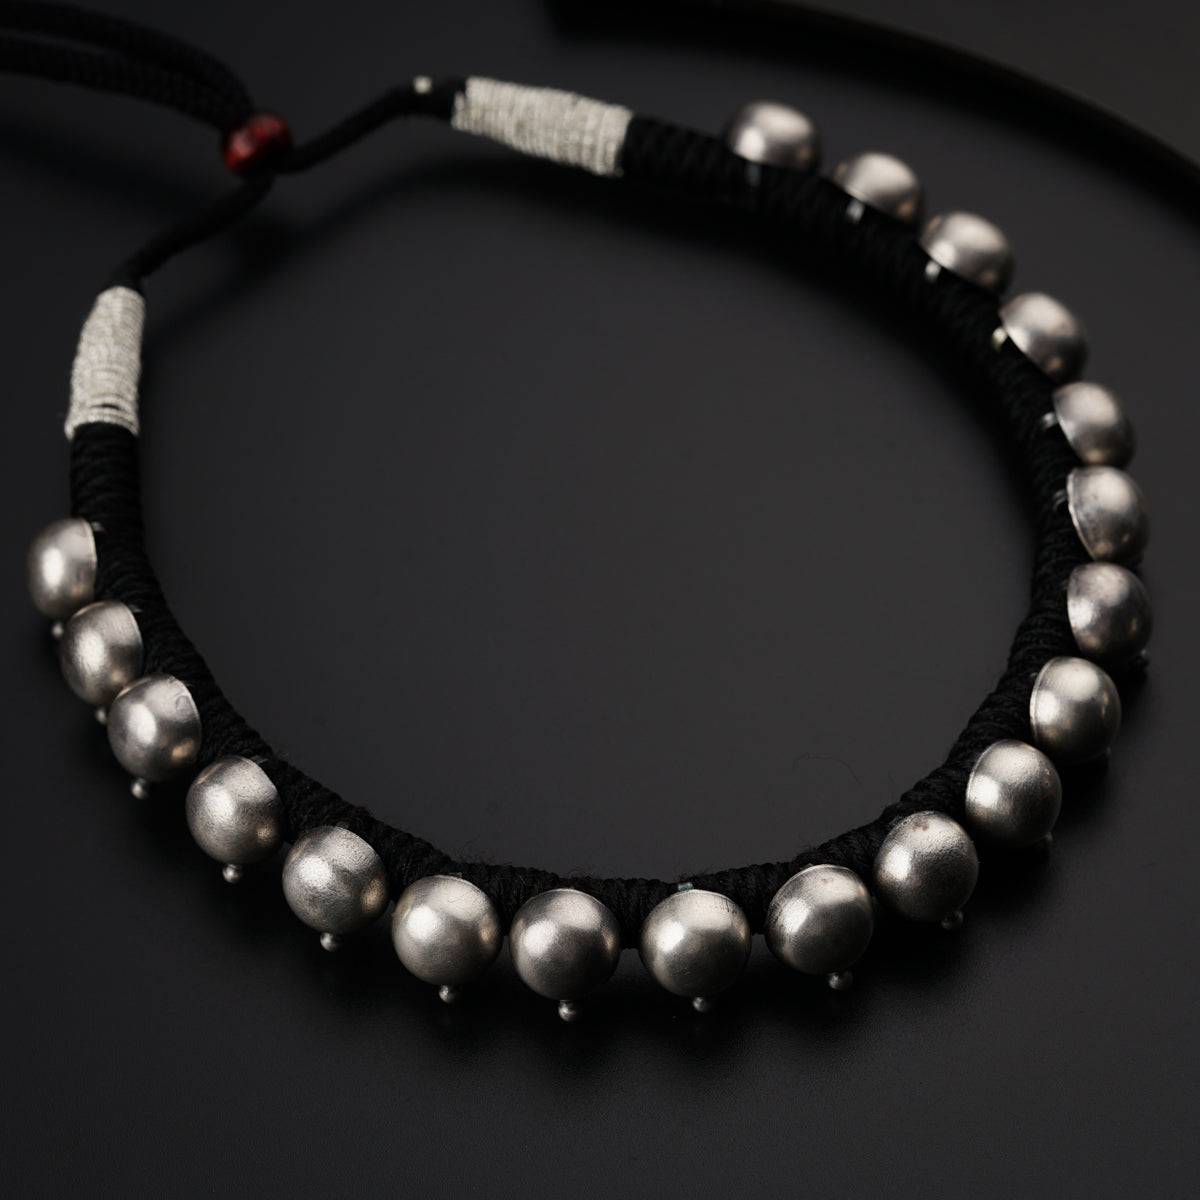 a black string bracelet with silver beads